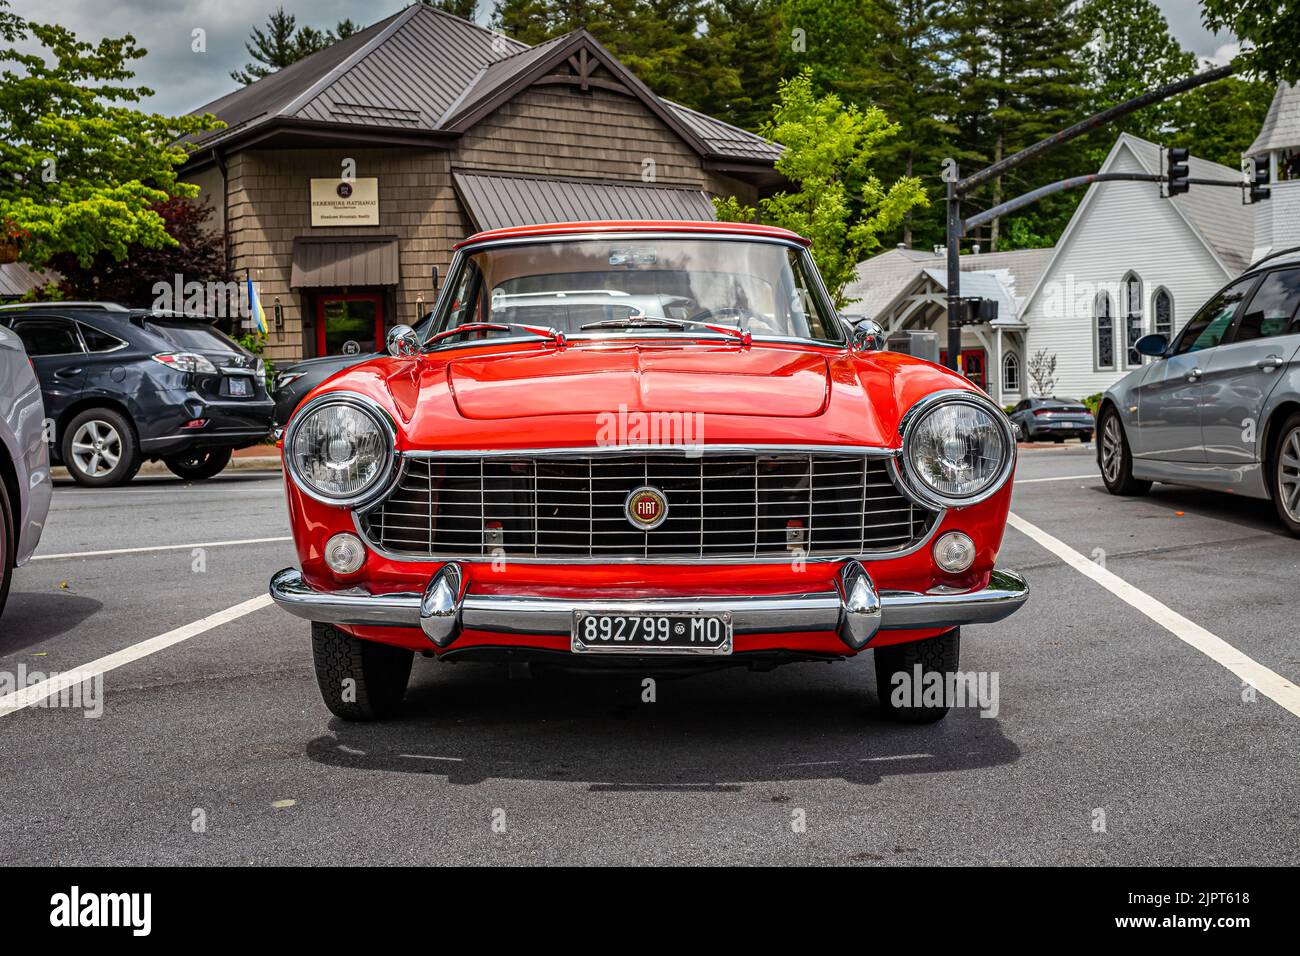 Highlands, NC - June 10, 2022: Low perspective front view of a 1966 Fiat 1500 Spider Hardtop Coupe at a local car show. Stock Photo